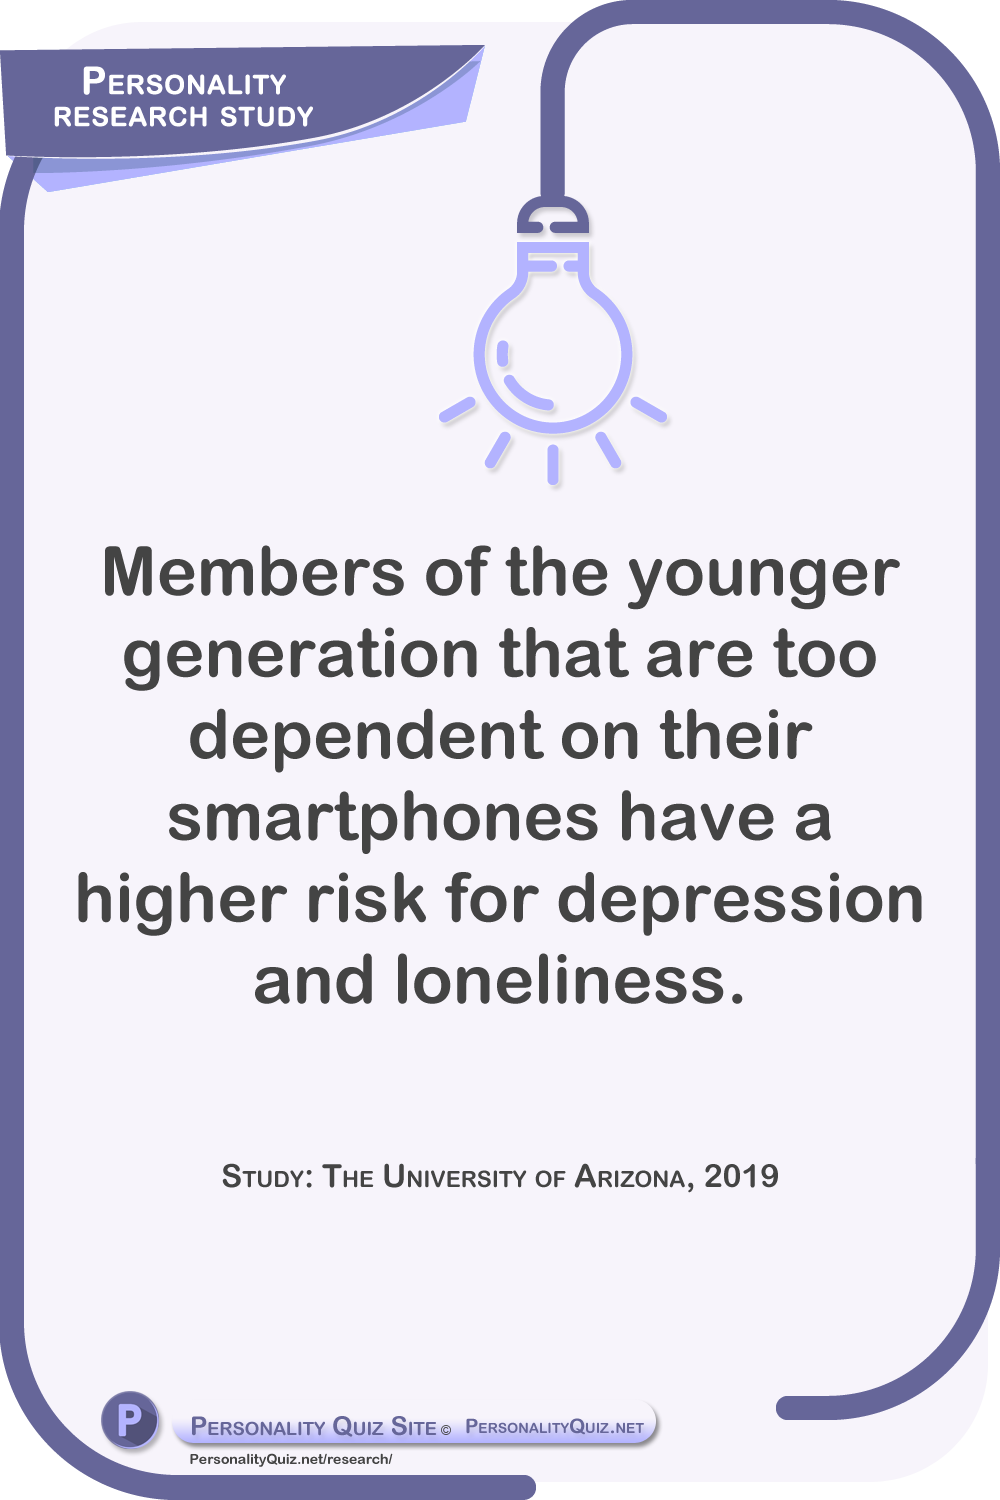 Members of the younger generation that are too dependent on their smartphones have a higher risk for depression and loneliness. Study: The University of Arizona, 2019